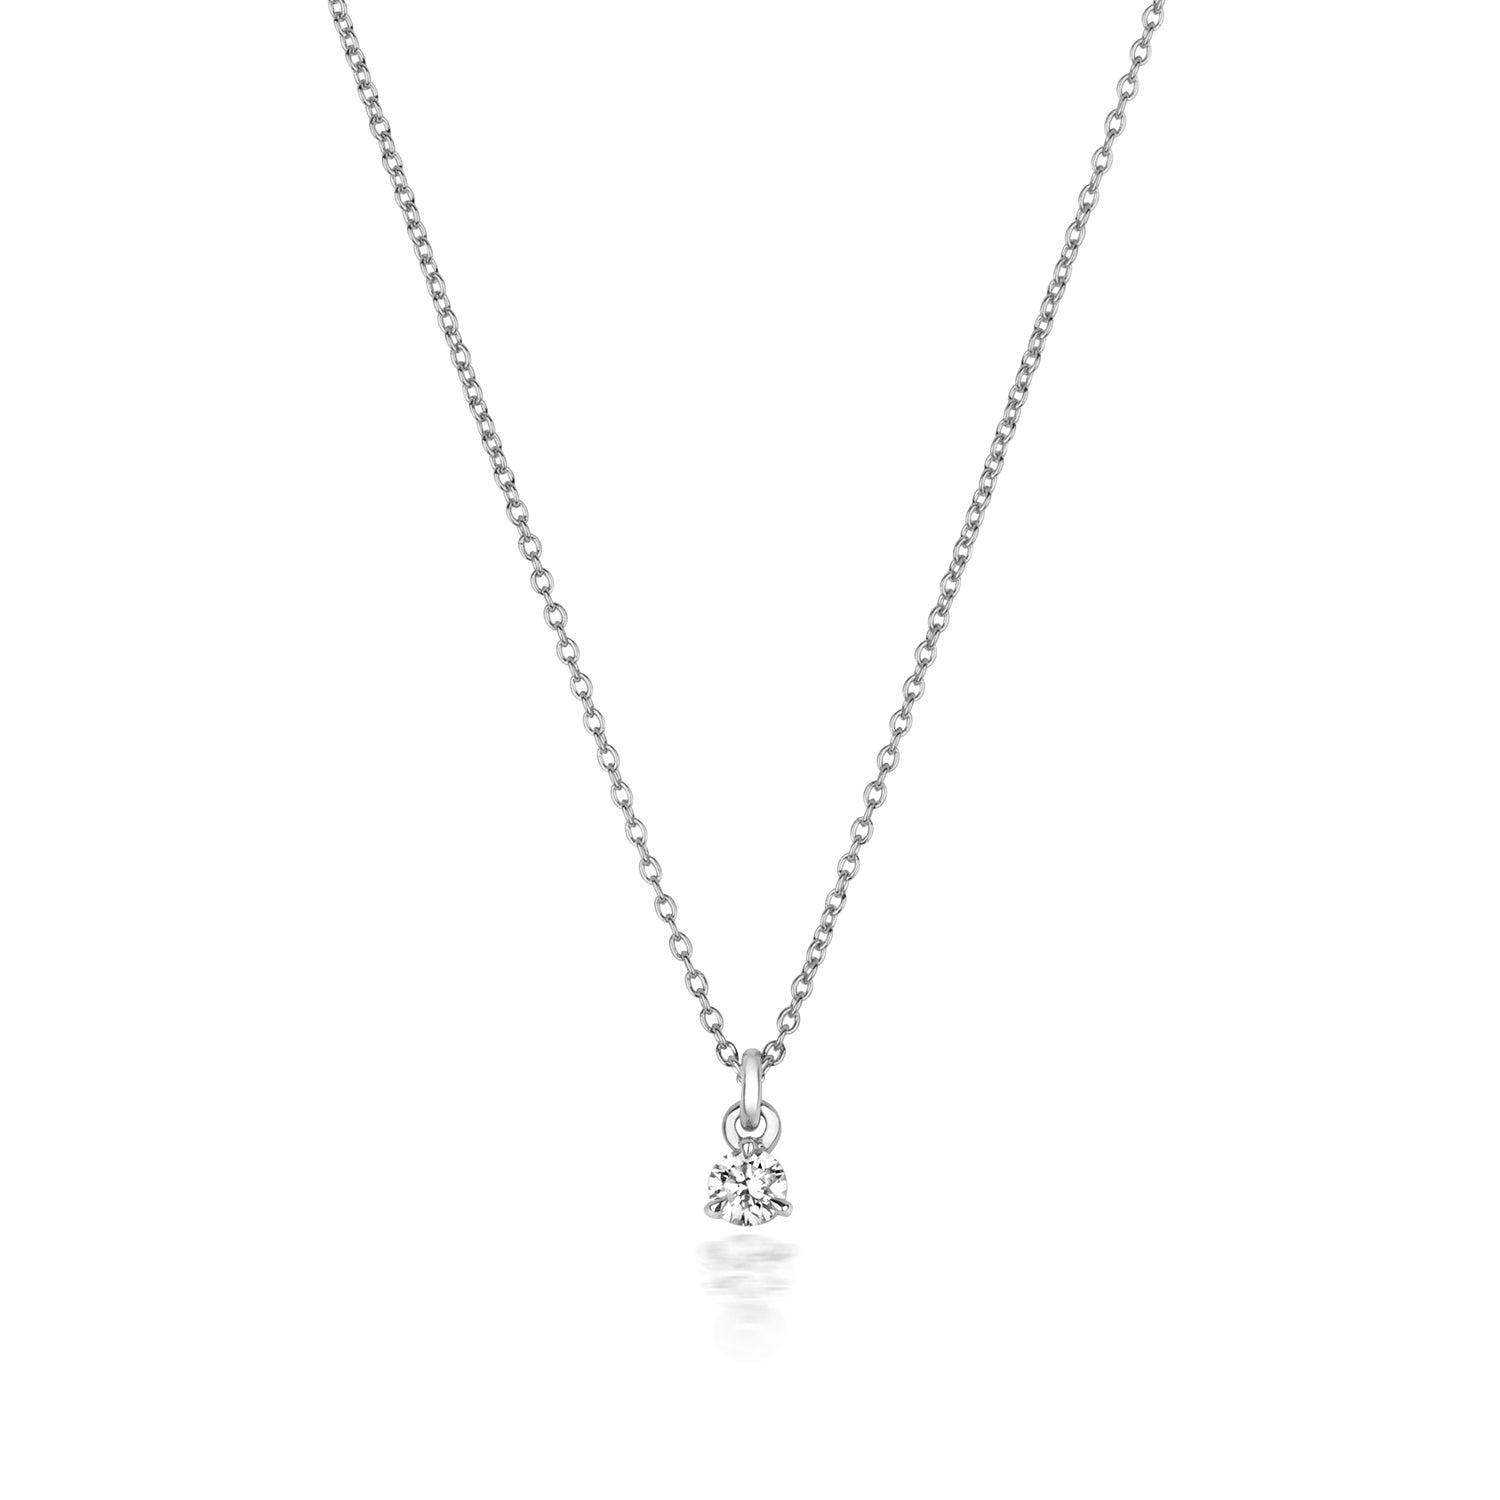 DIAMOND 3 CLAW NECKLACE IN 18CT WHITE GOLD